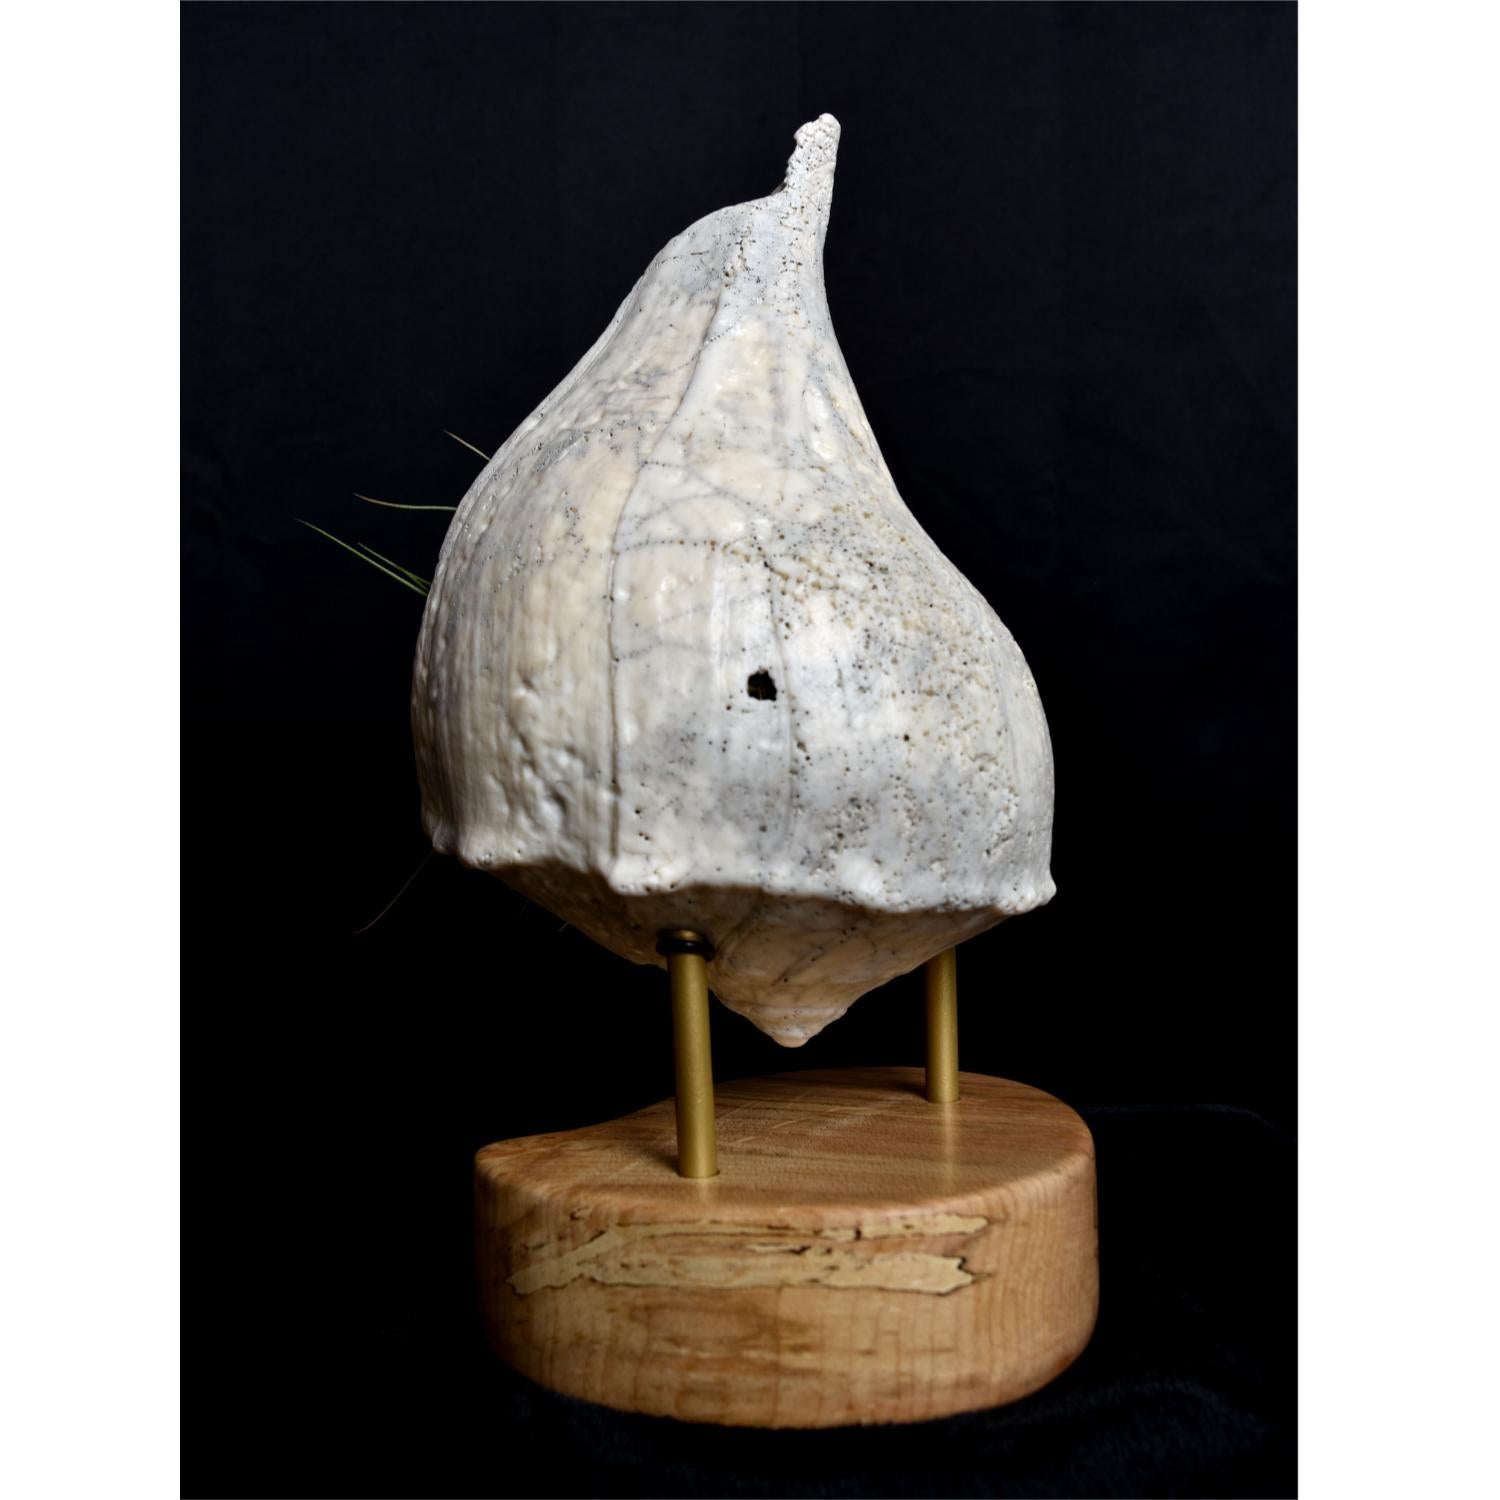 Organic Modern Giant Whelk Conch Sea Shell Living Sculpture & Air Plant on Spalted Maple Base